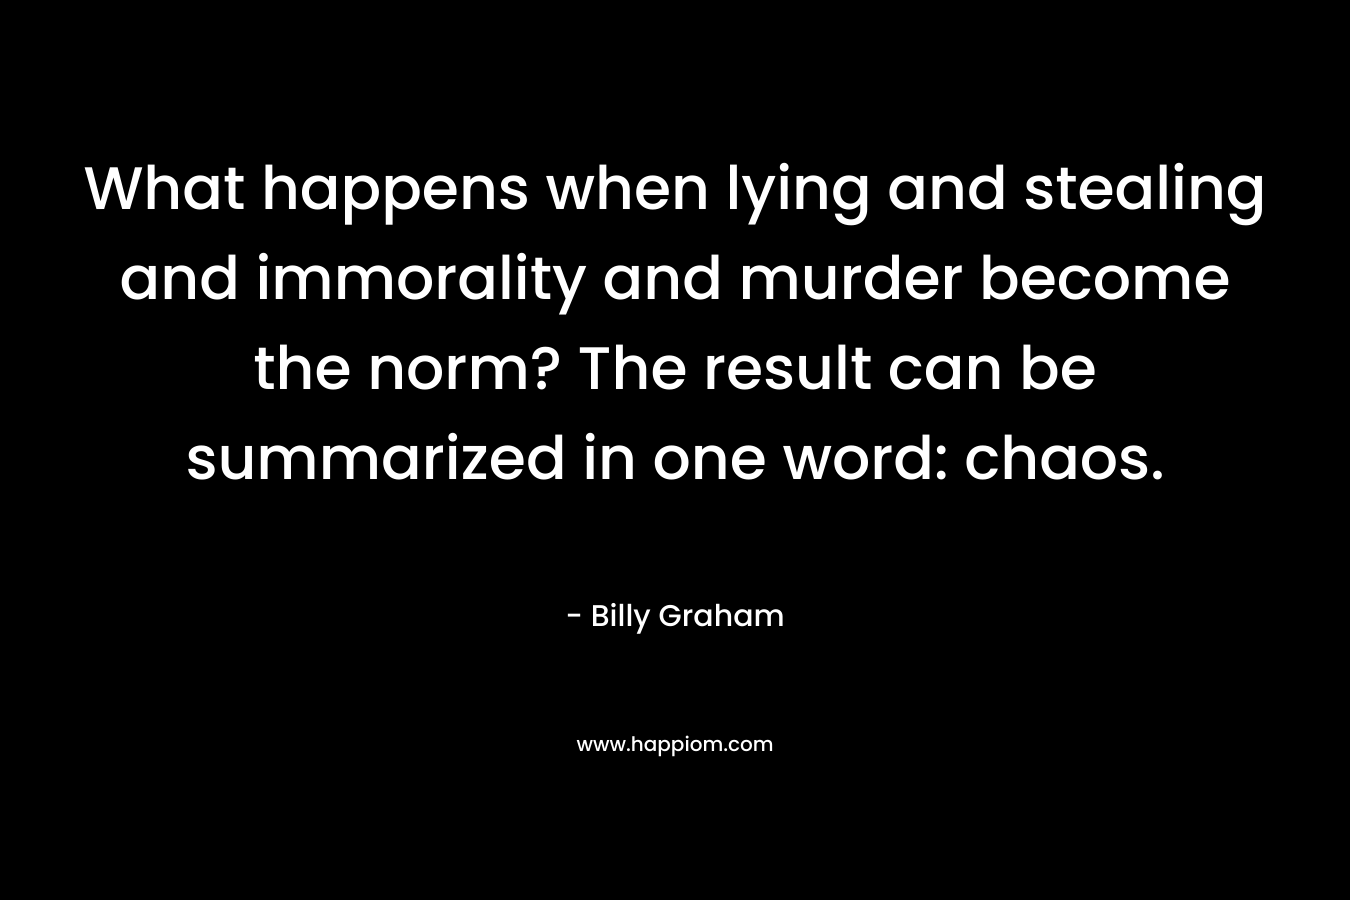 What happens when lying and stealing and immorality and murder become the norm? The result can be summarized in one word: chaos. – Billy Graham